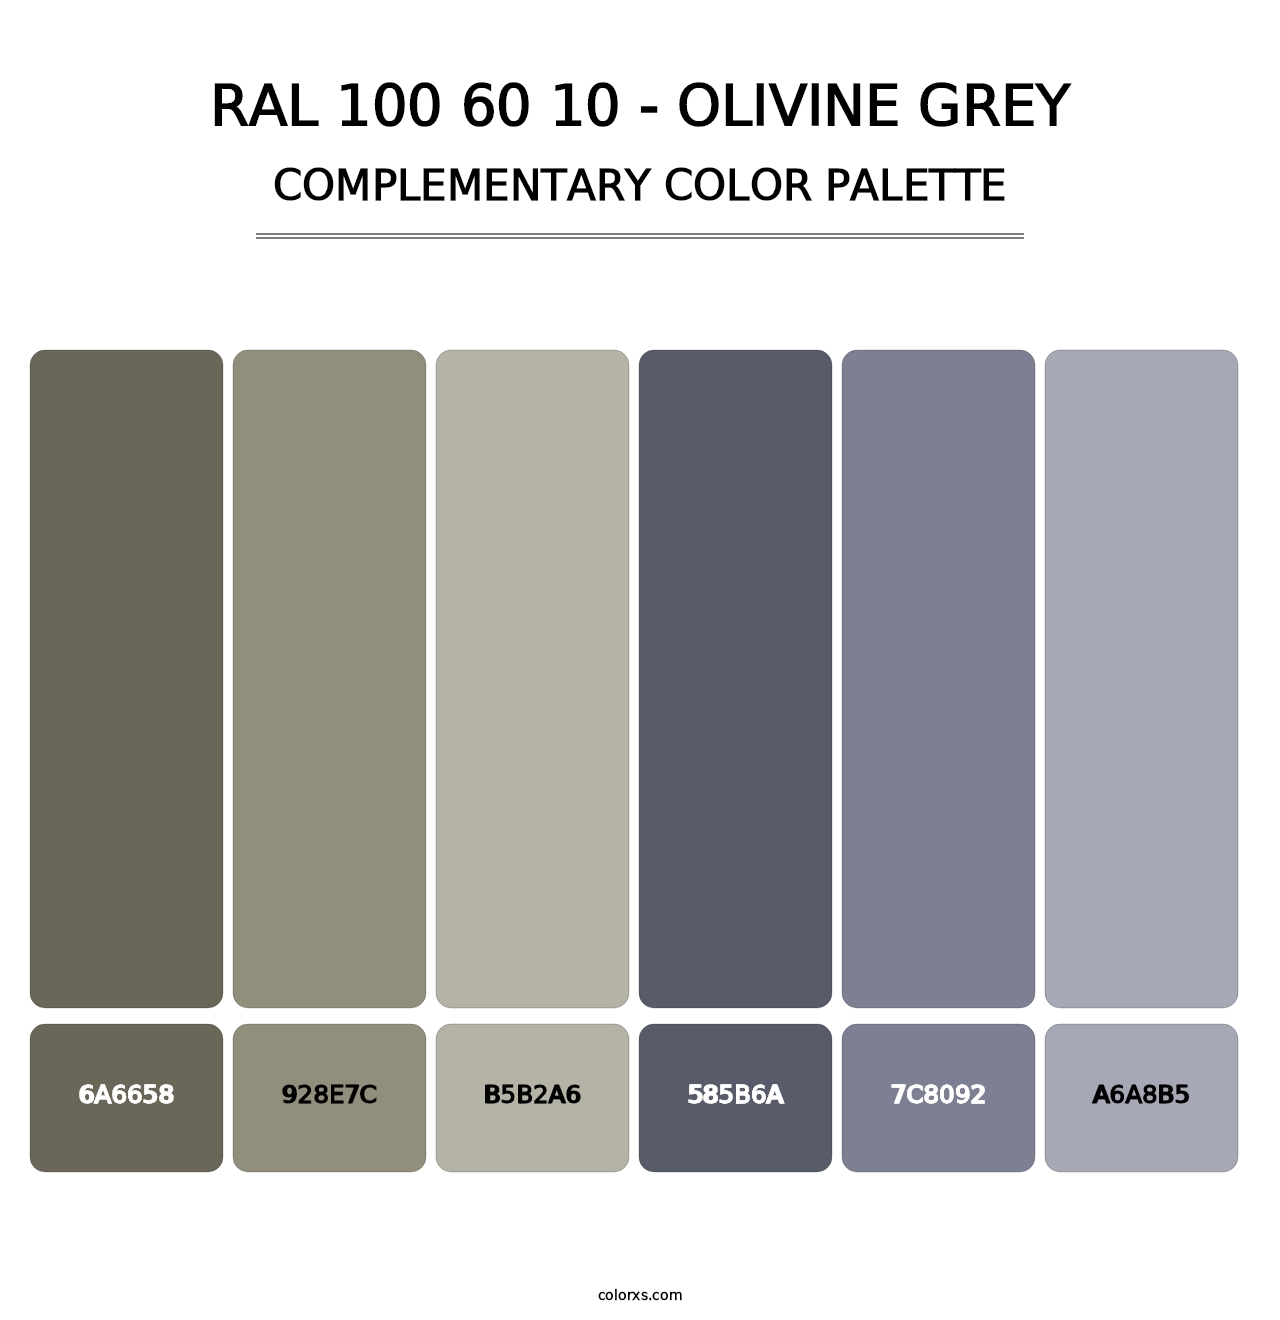 RAL 100 60 10 - Olivine Grey - Complementary Color Palette